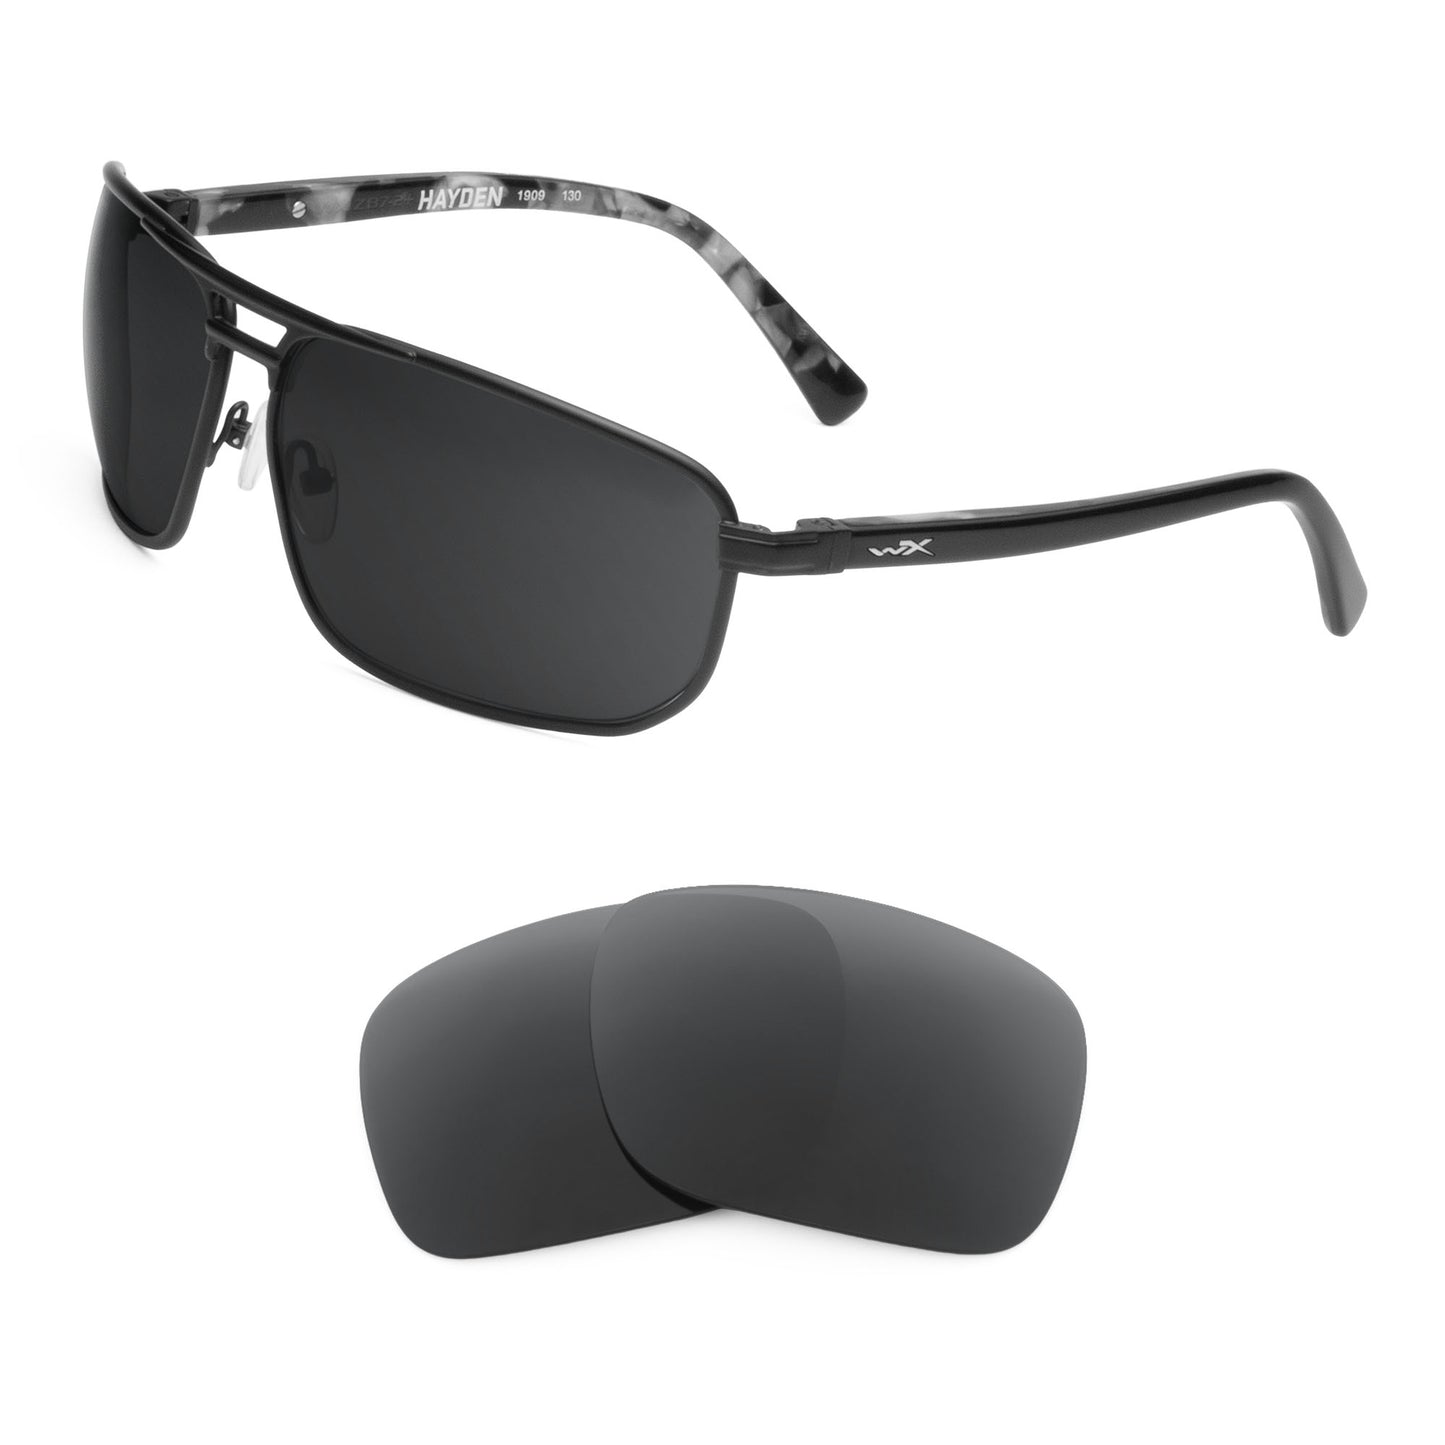 Wiley X Hayden sunglasses with replacement lenses